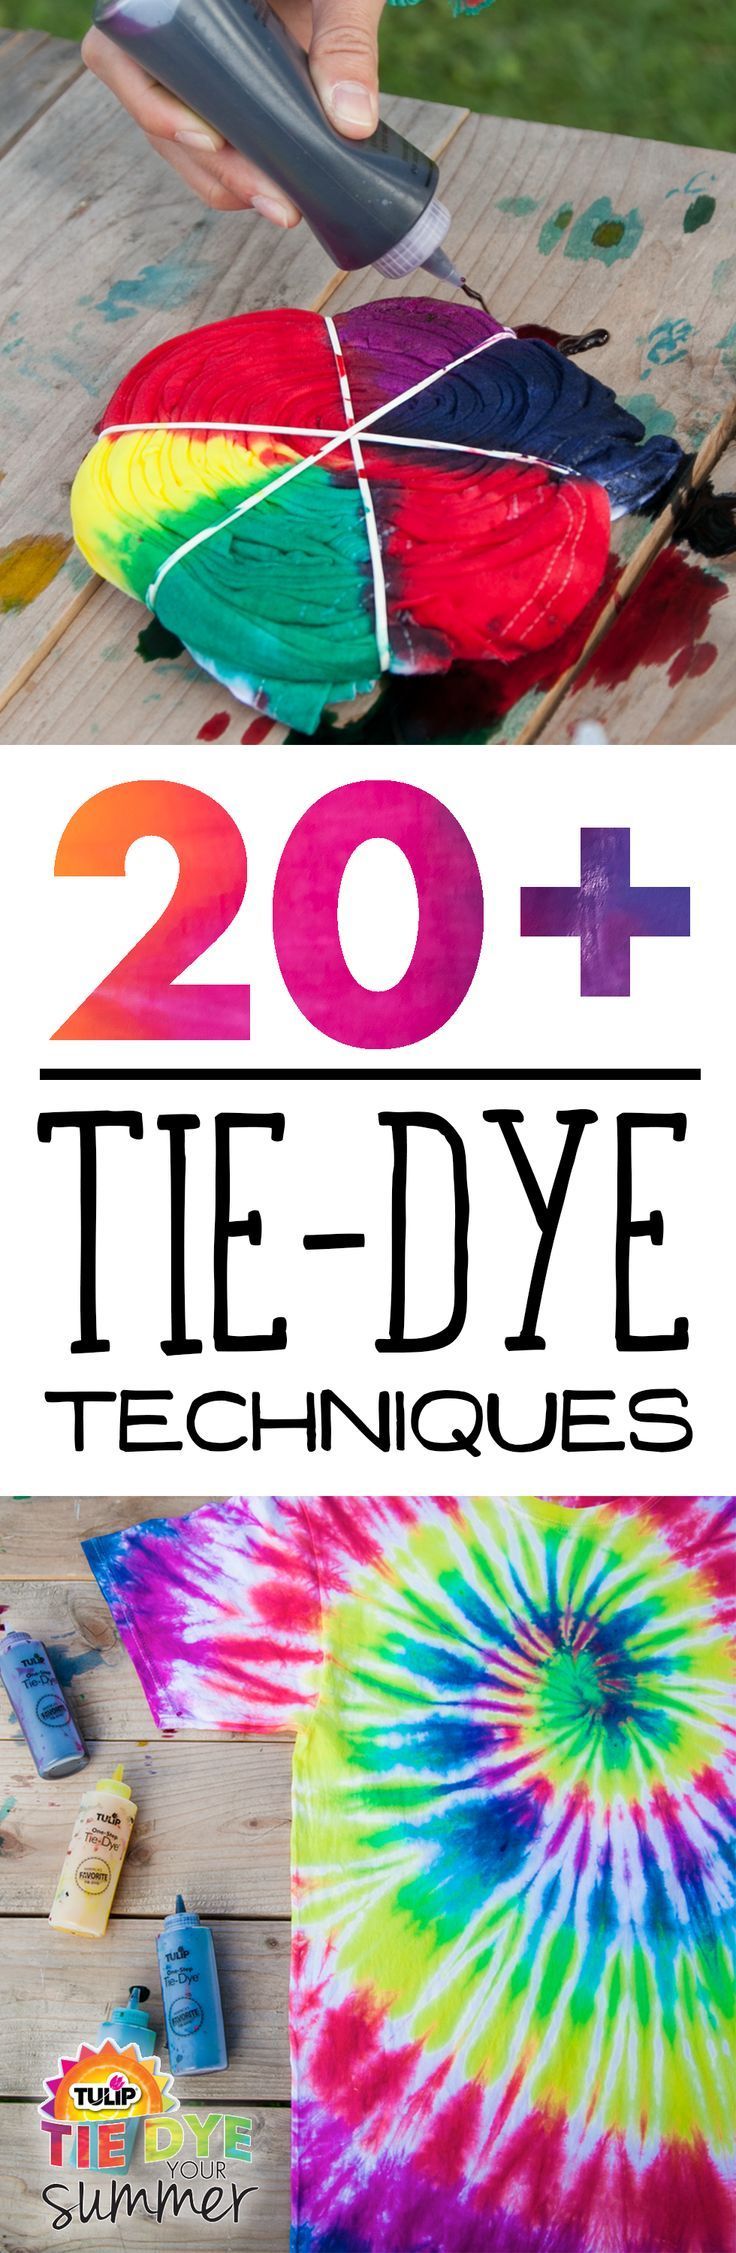 Looks like the perfect afternoon! Love DIY and tie-dye? Check out tiedyeyoursummer.com for all the best te